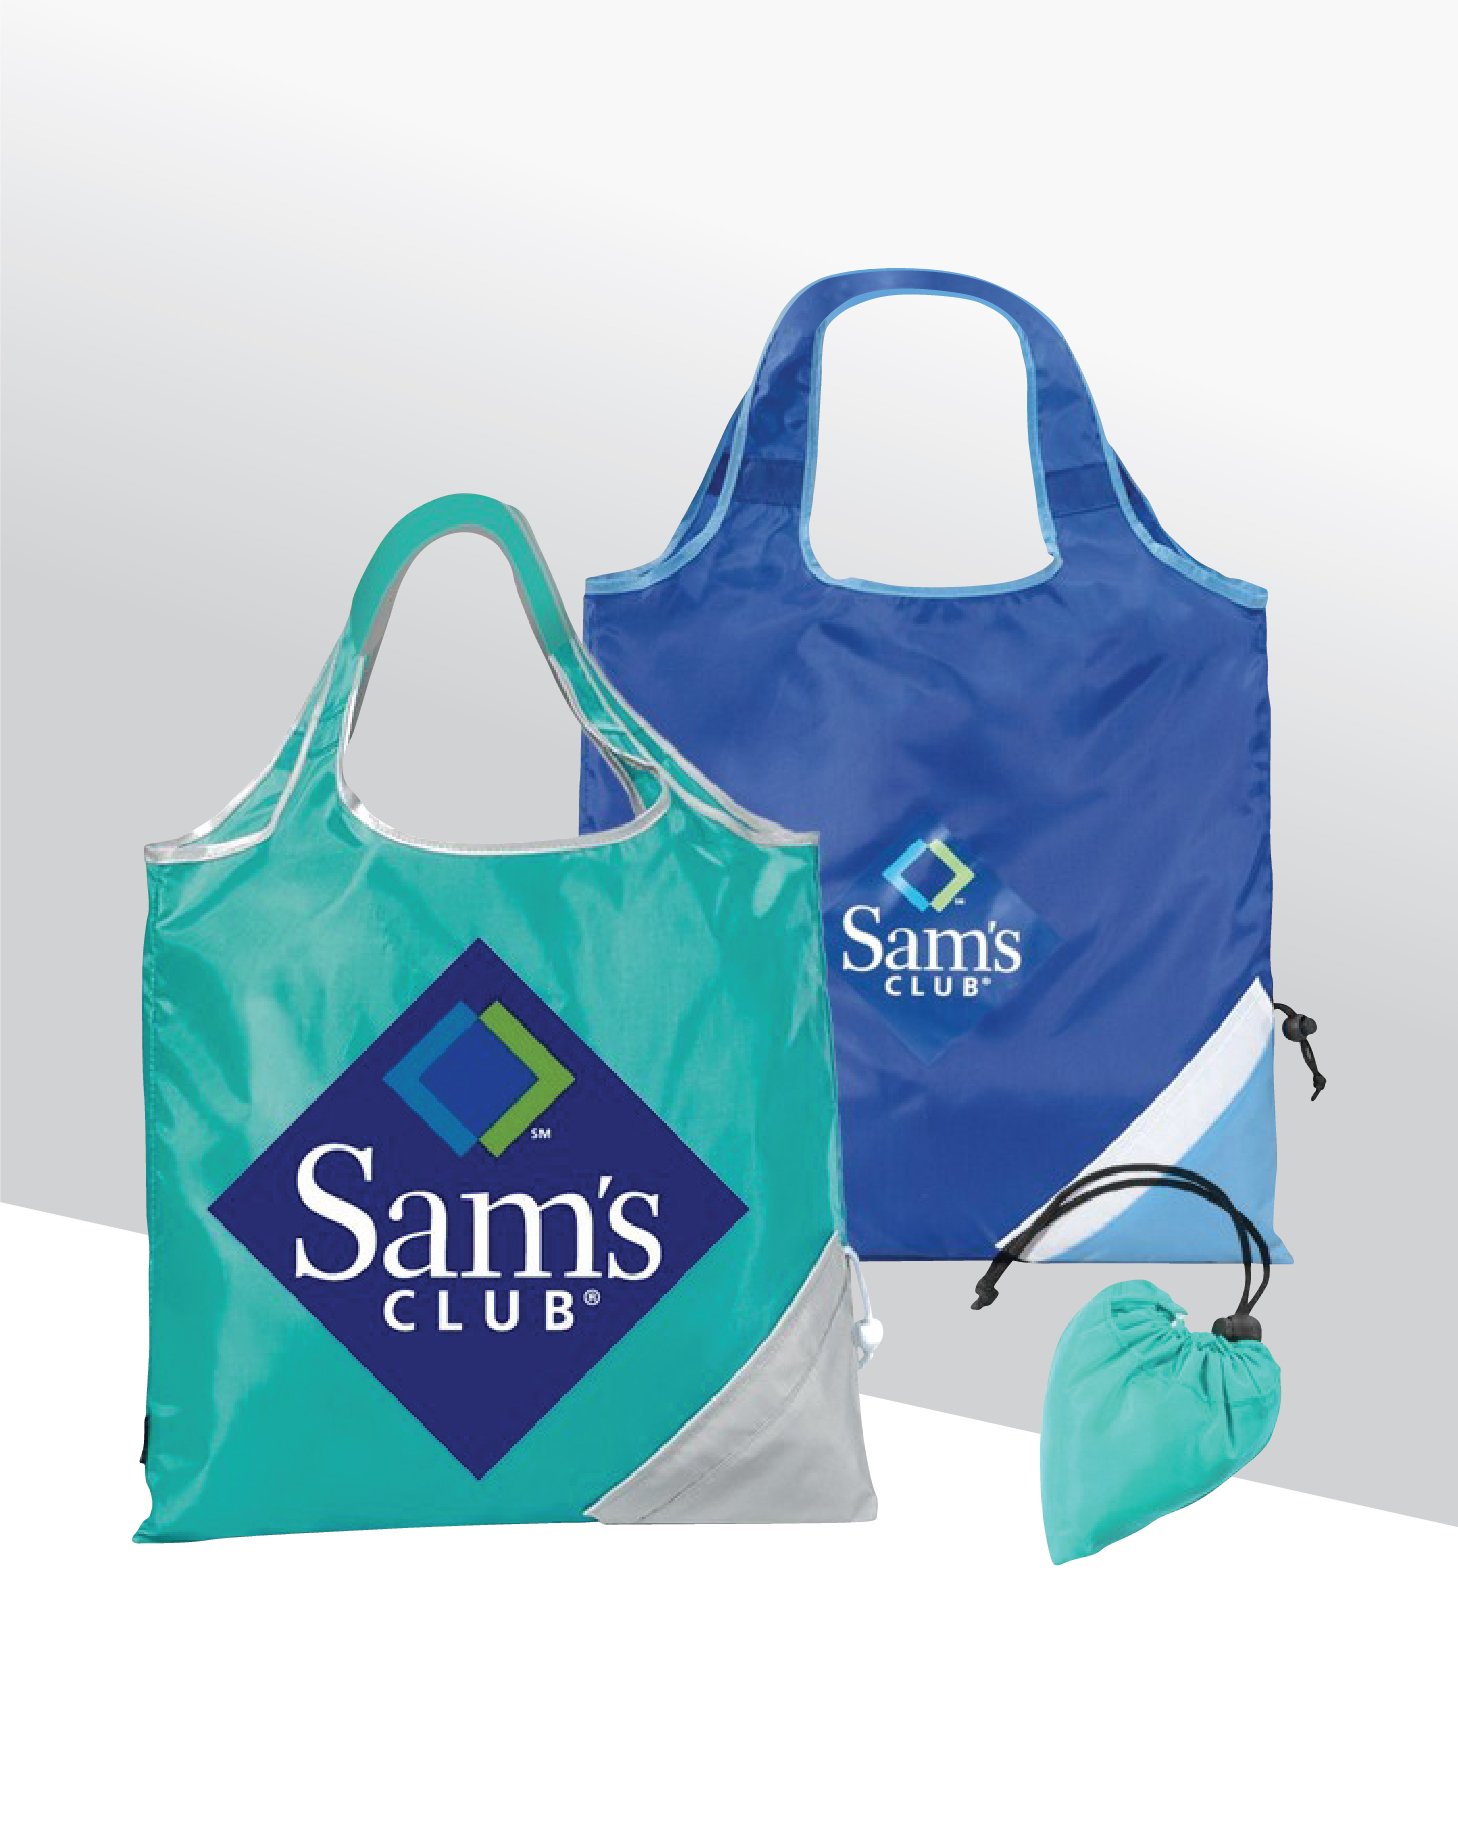 Shop Folding Totes Here!